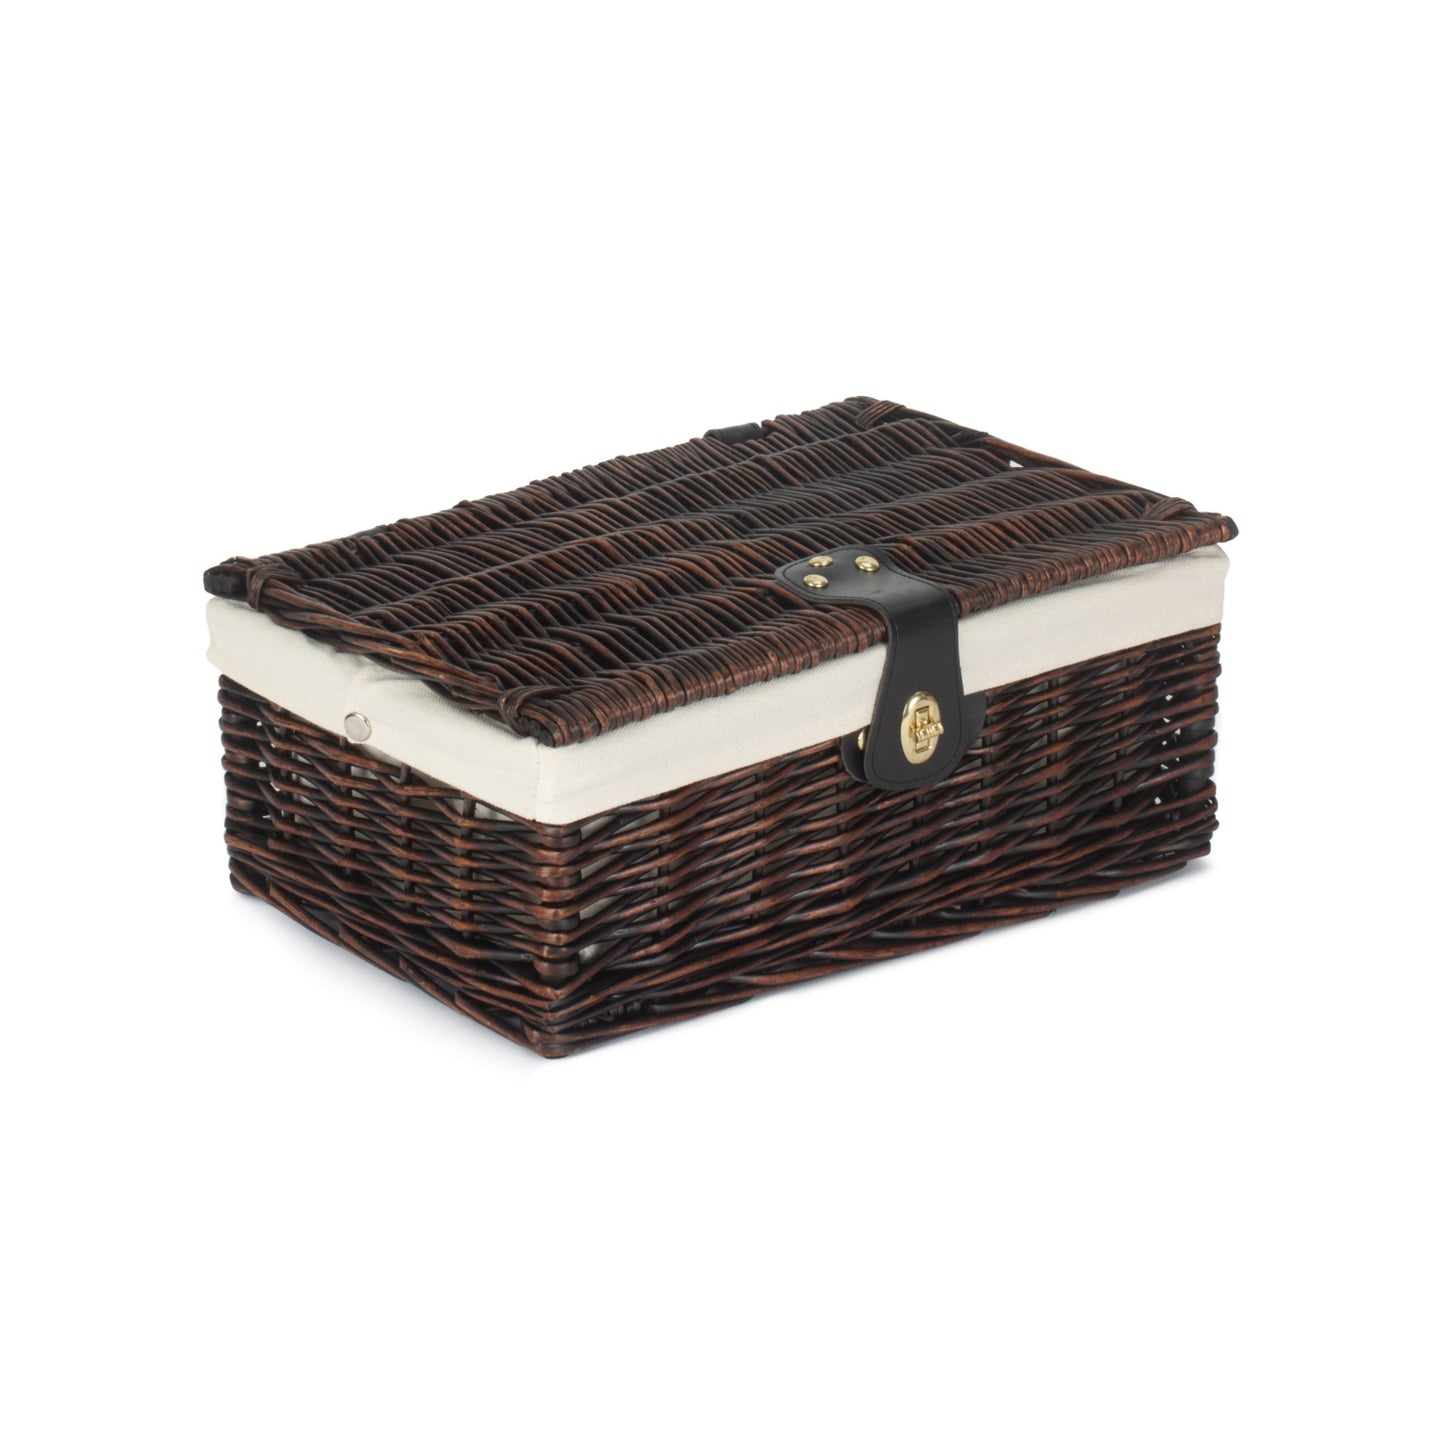 14 Inch Chocolate Brown Hamper With White Lining